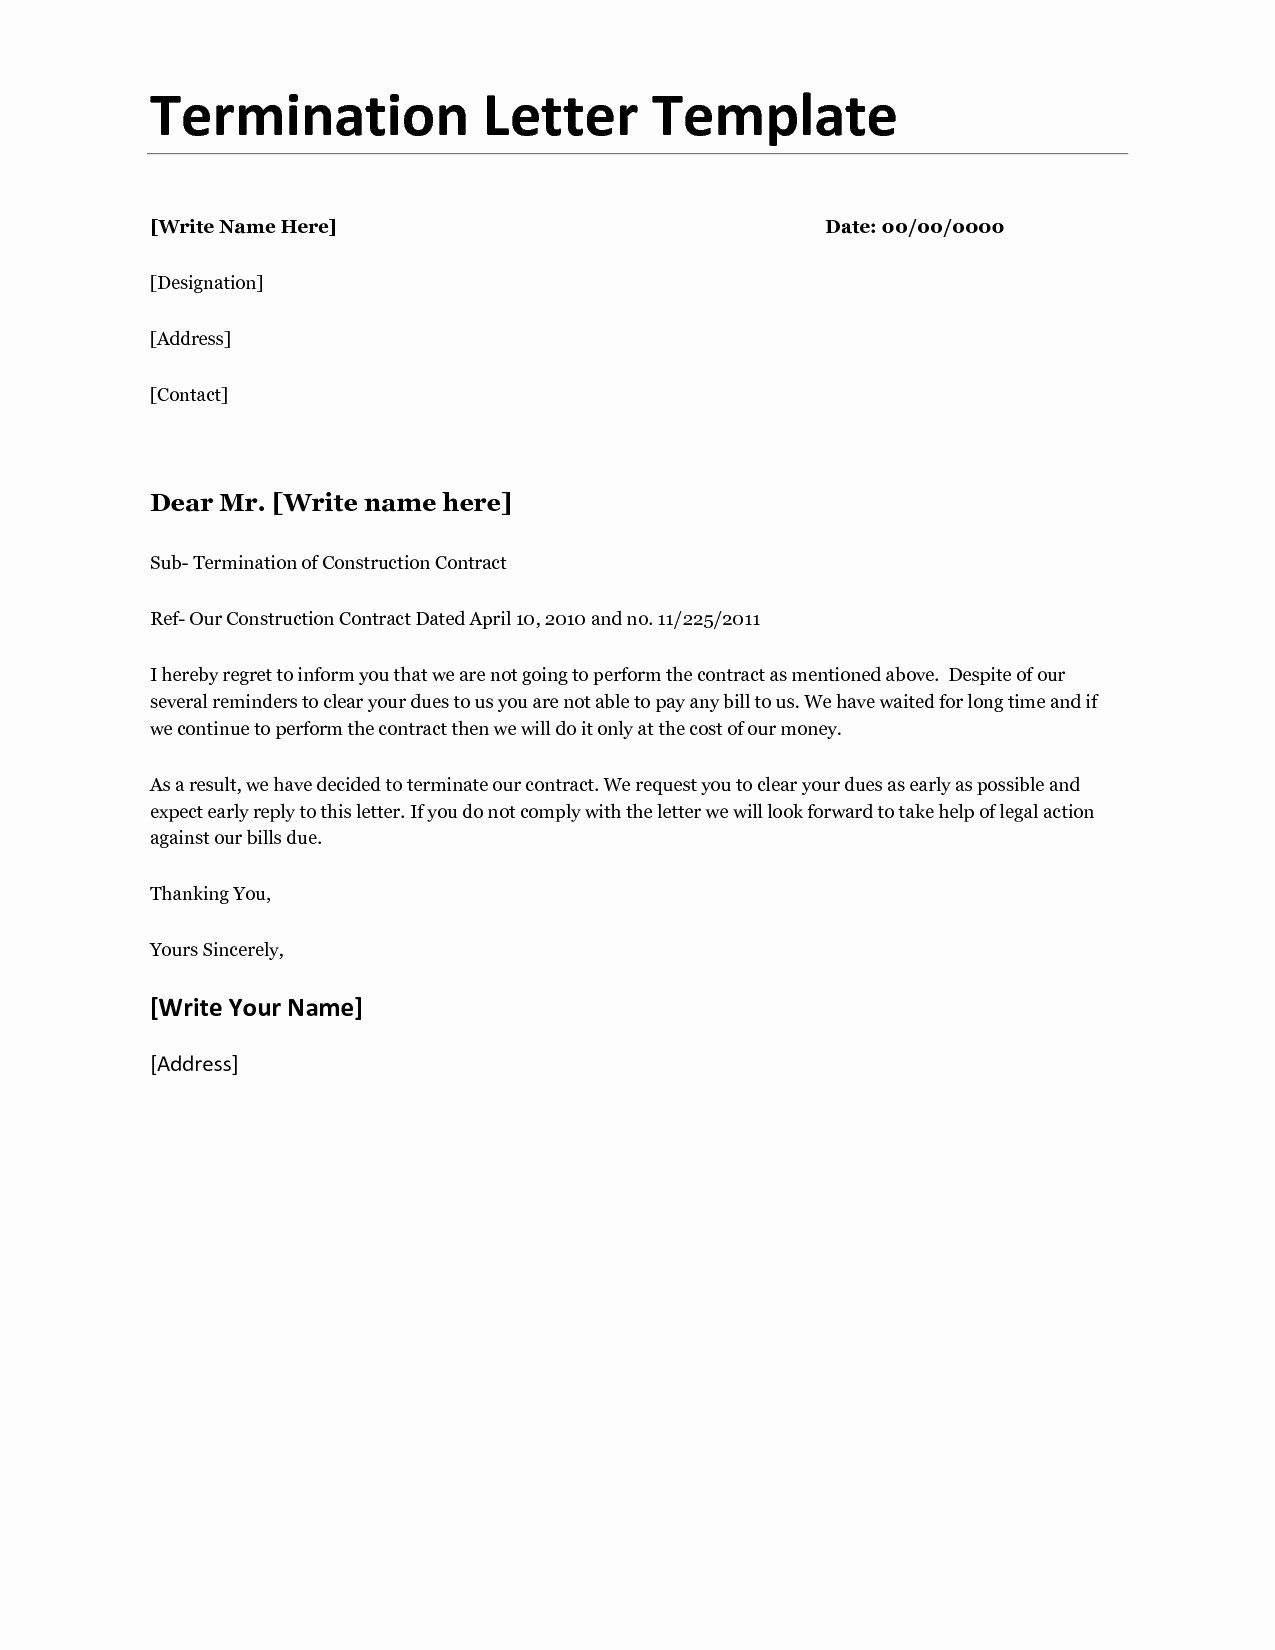 Business Termination Letter Template Samples for Your